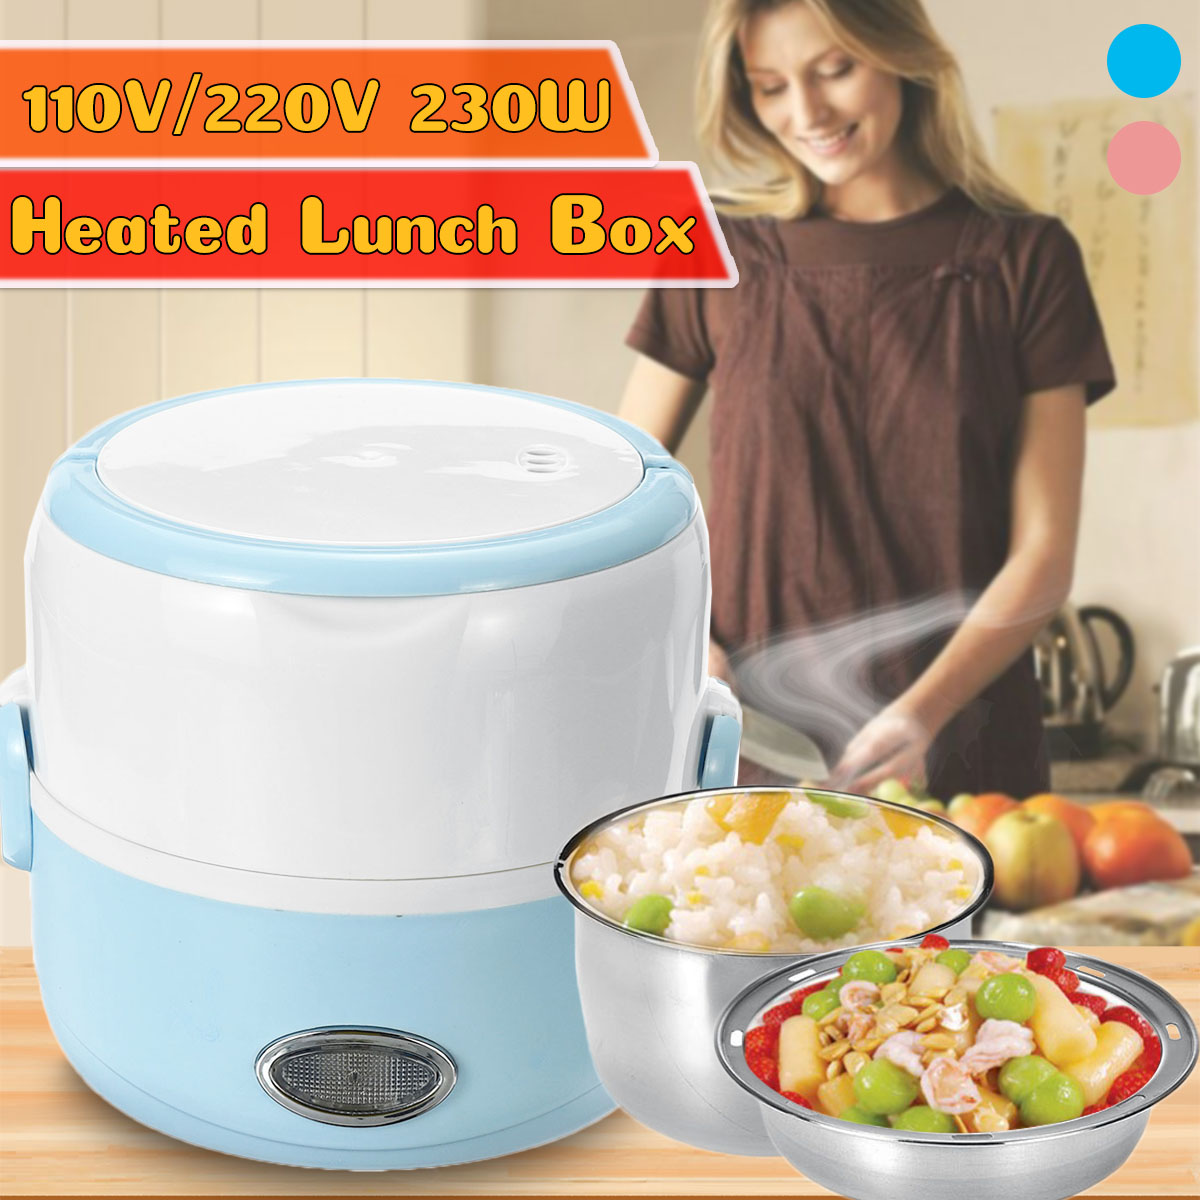 230W-13L-Portable-Electric-Stainless-Steel-Lunch-Bento-Box-Picnic-Bag-Heated-Food-Storage-Warmer-Hot-1661057-3